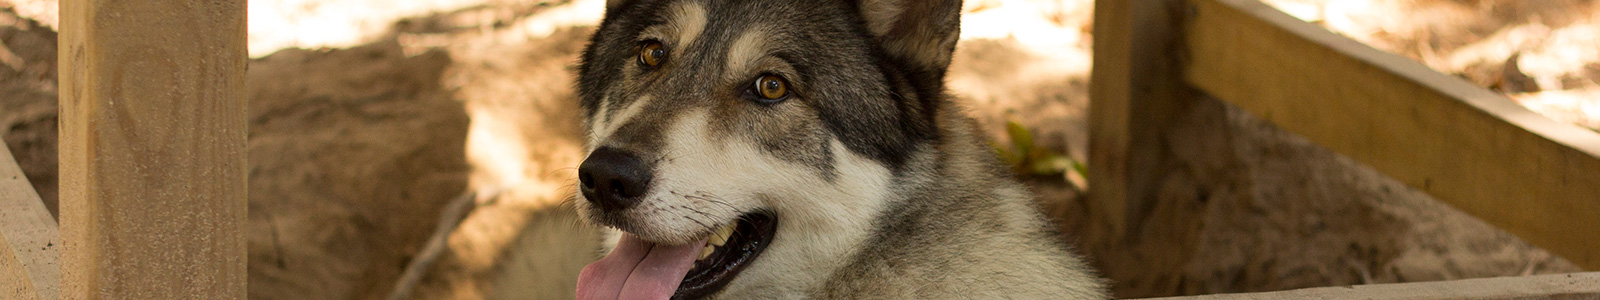 Texas Wolfdog Project Events + News Header Image